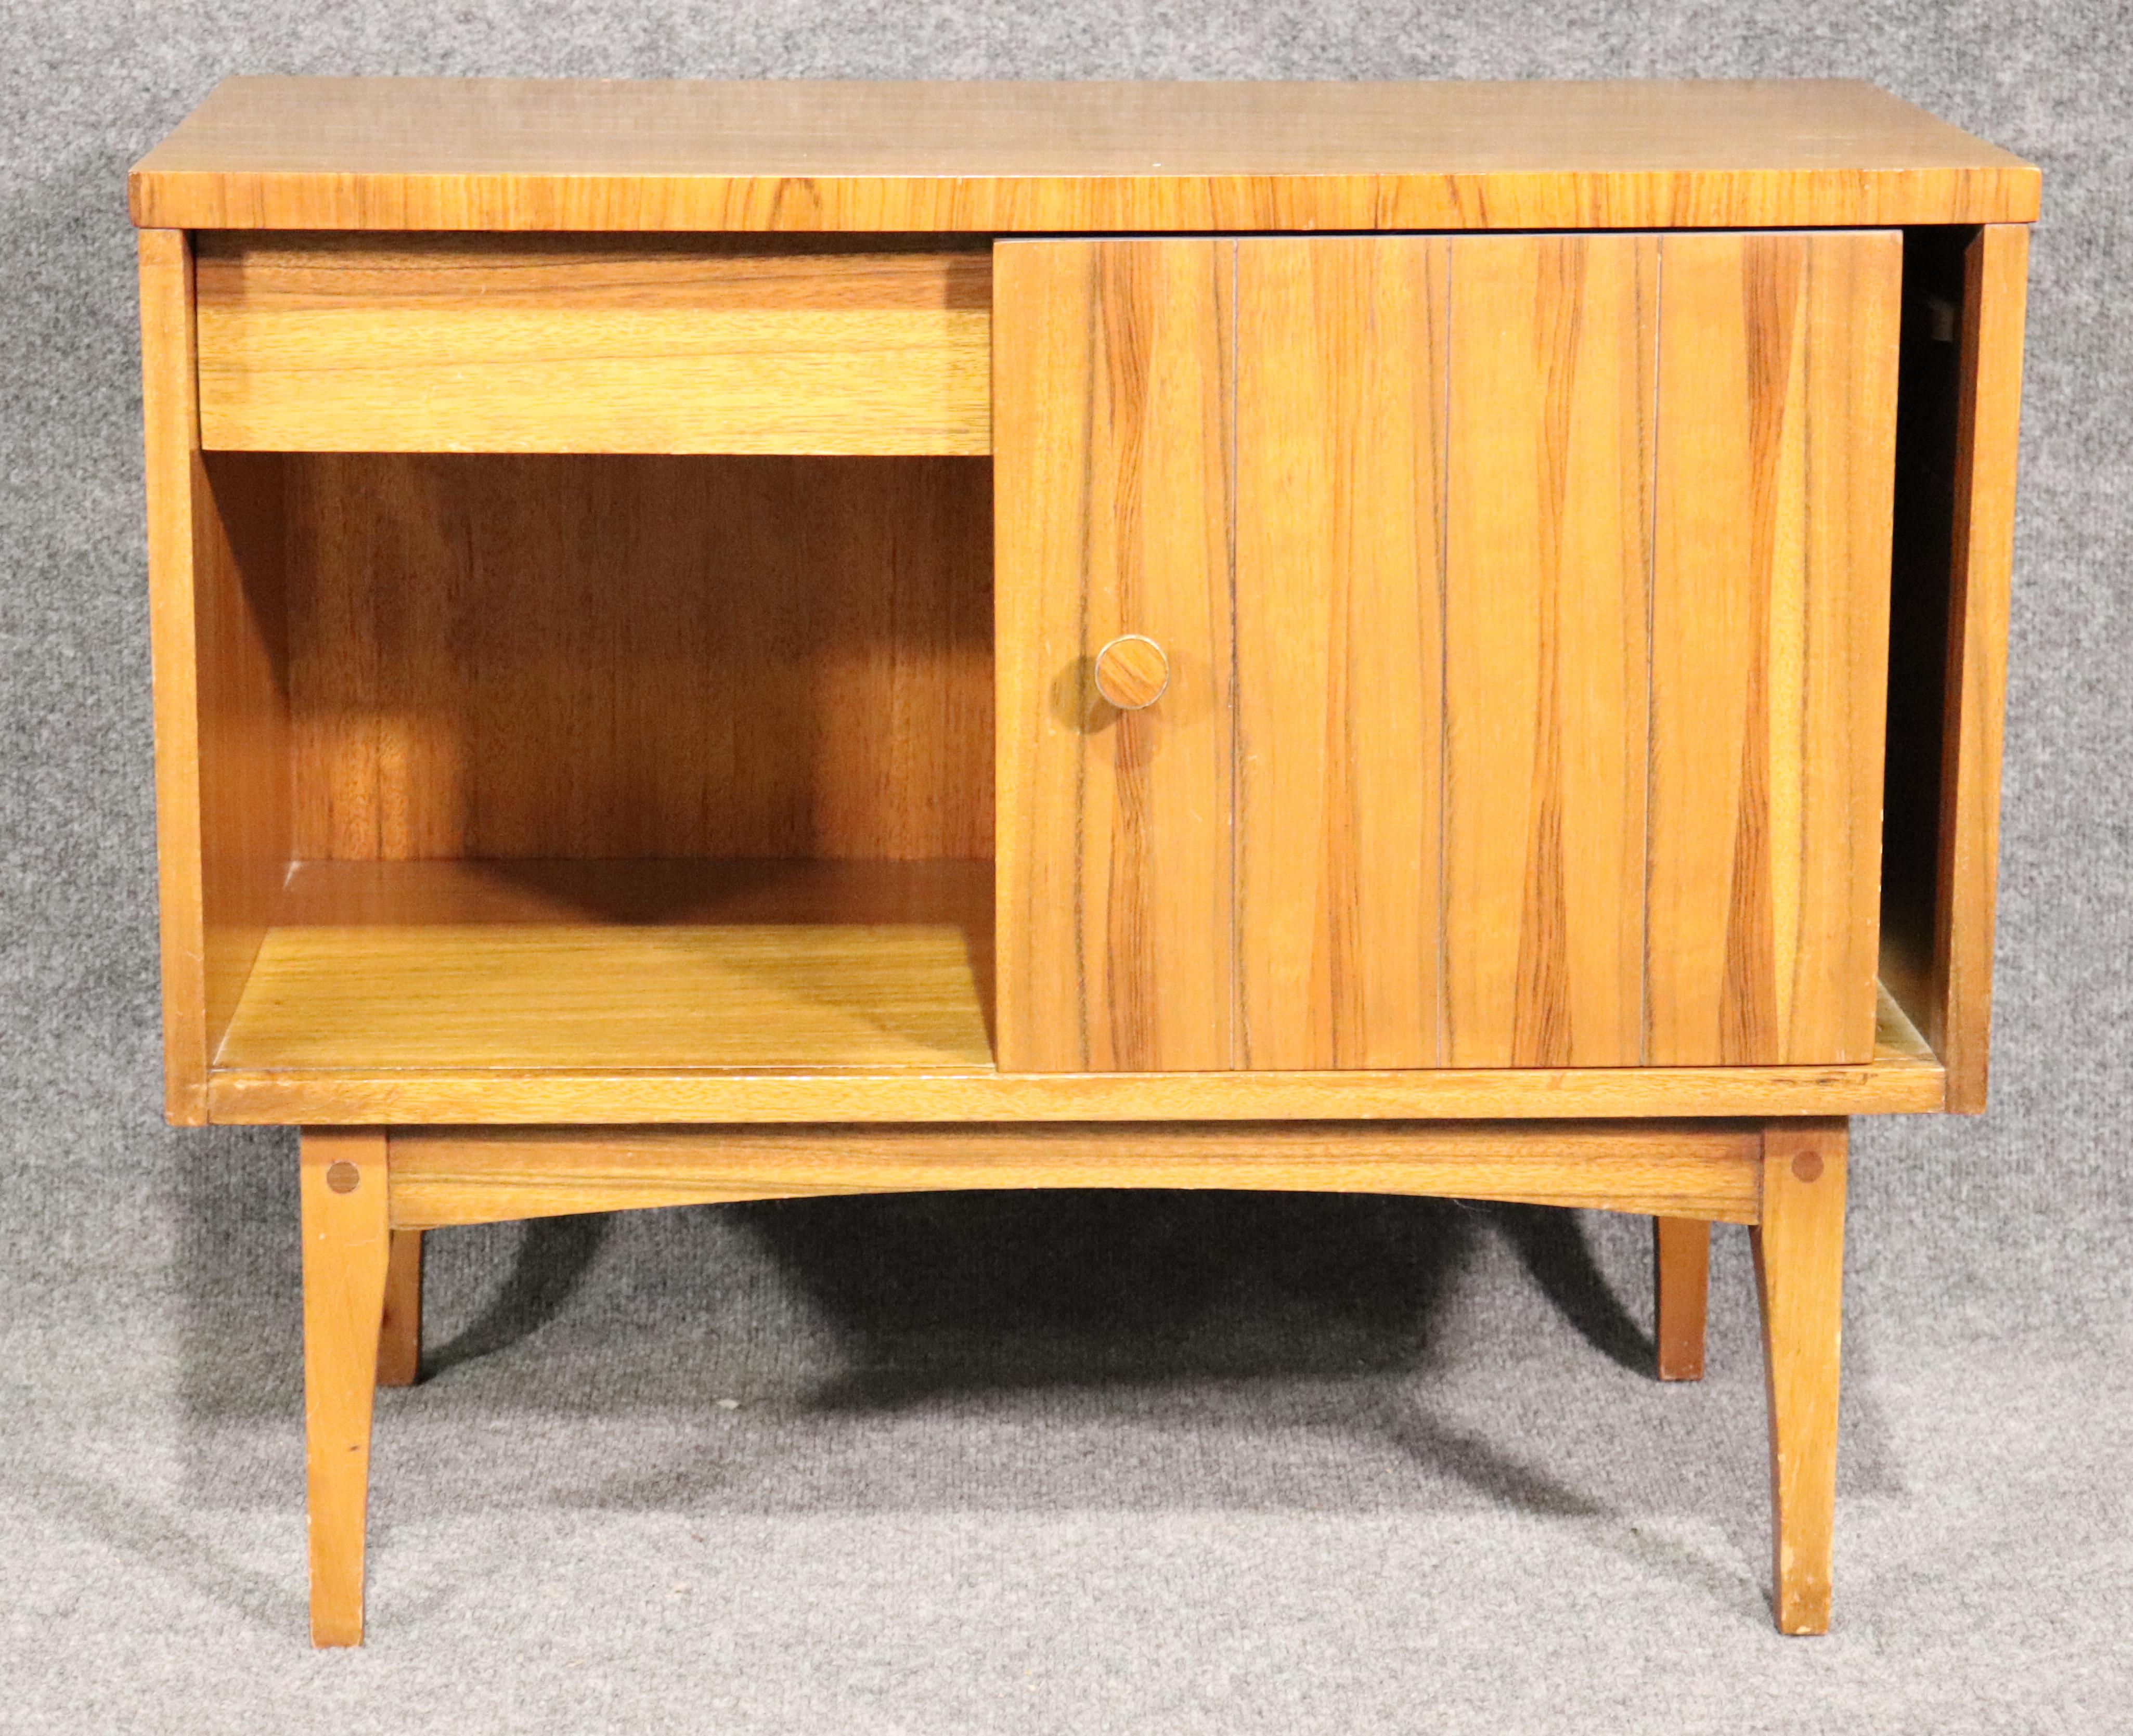 Single end table with cabinet space designed by Lane Furniture. Features delicate rosewood inlay tapered legs and sliding door.
Please confirm location.
  